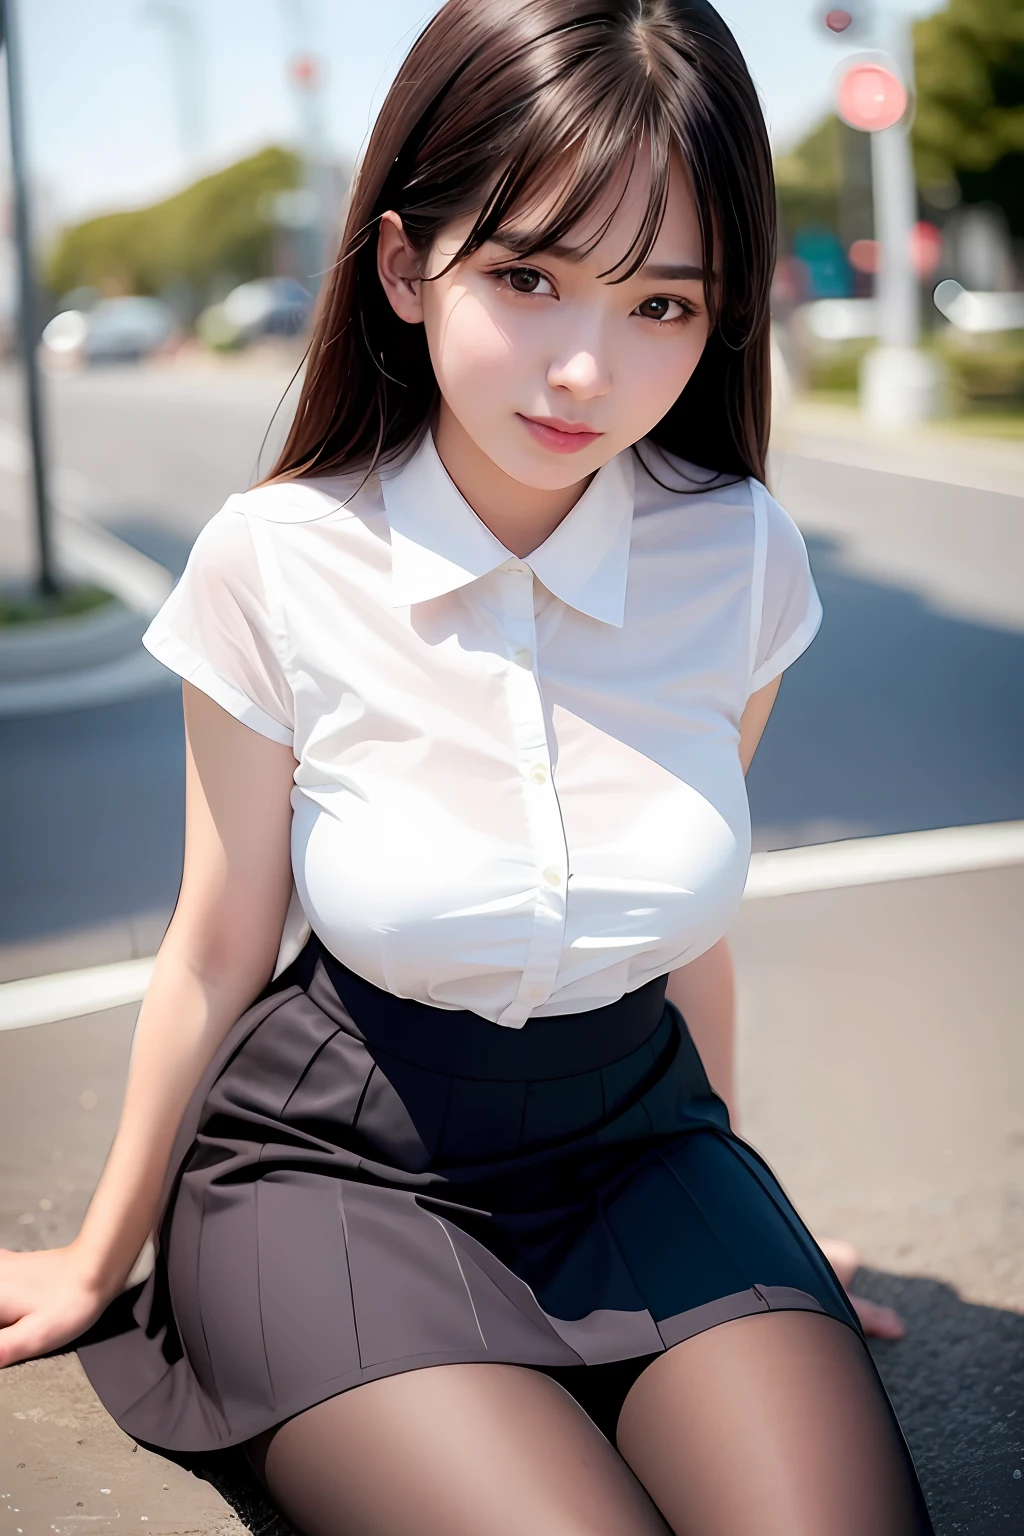 (Highly detailed CG unity 8k wallpaper), (Masterpiece), (Best Detail), (Best Detail), (Best Illustration), (Best Shadow), (Photorealistic:1.6), Real Human Skin, Lens Flare, Shade, Backlight, Bloom, Depth of Field, Natural Light, Hard Focus, Film Grain, Look Viewer, Asian, kpop idol:1.2, mix4 , 1 girl, 21 years old, solo, skinny, pale skin, soft lips, (thin eyebrows: 1.4), shiny brown eyes, black straight hair, small breasts, beautiful detailed sky, street (crowd: 1.2), night, (nose turns red), beautiful detailed eyes, white Japan school uniform, sailor suit, black pleated skirt, stockings, sneakers, happy, smile